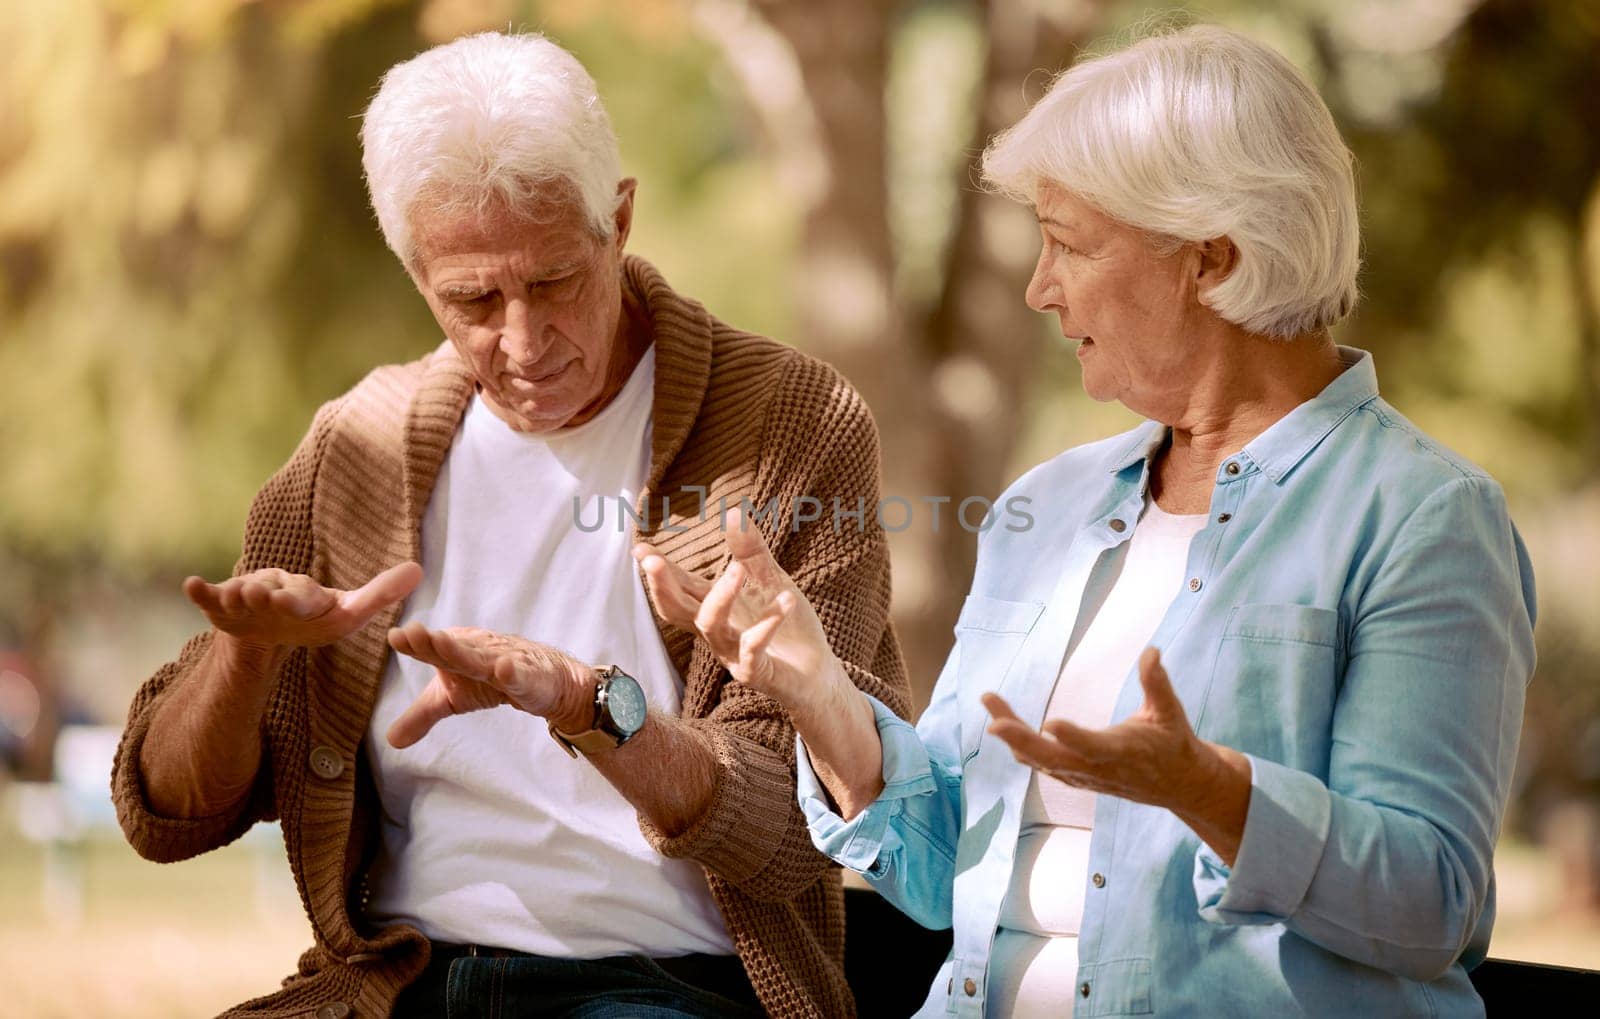 Senior couple, love and hands in sign language communication in nature, public park or garden. Retirement elderly, gesture or deaf disability in bonding date for man and woman in support conversation.